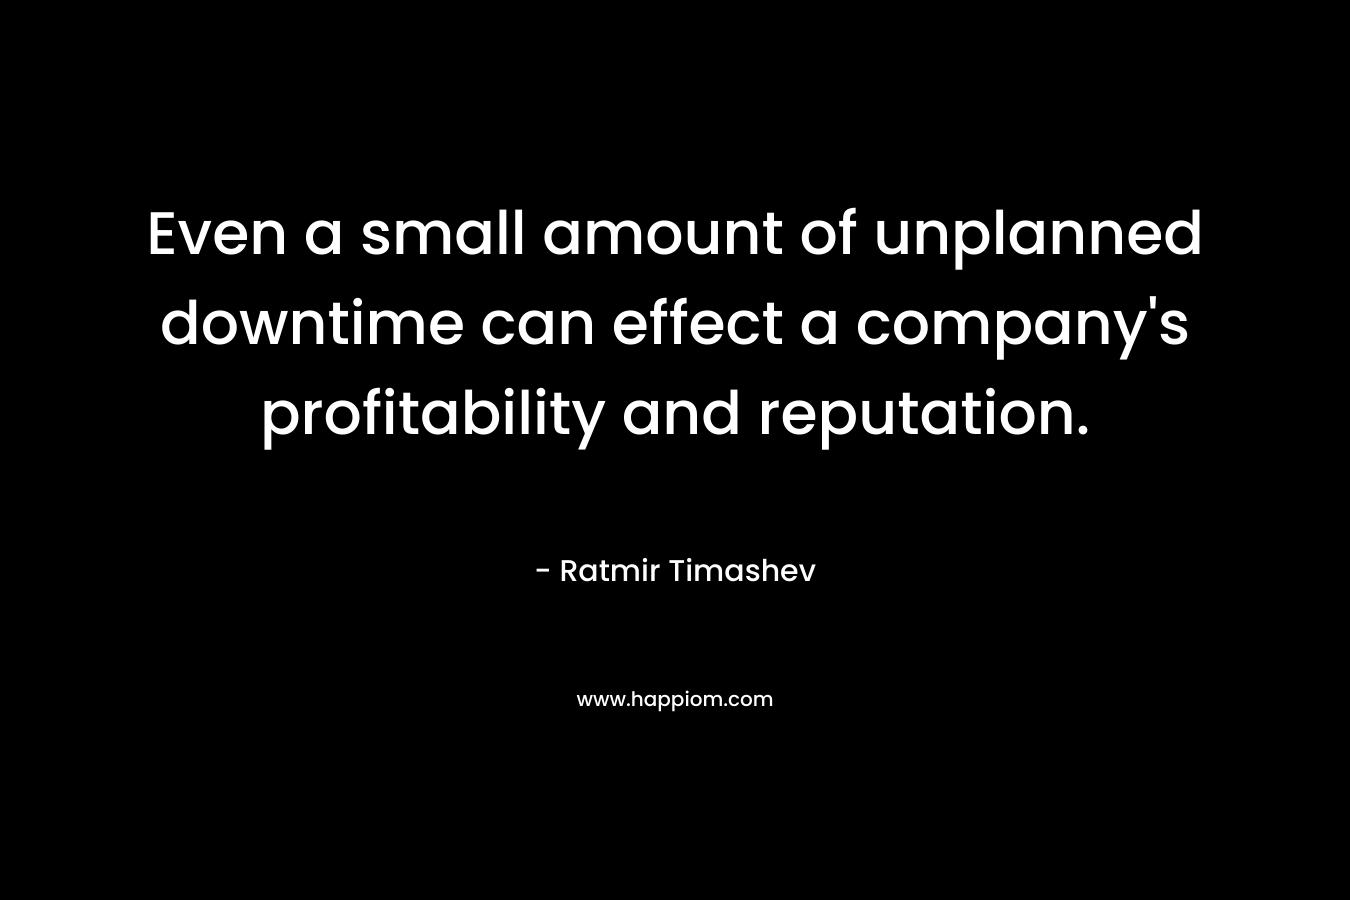 Even a small amount of unplanned downtime can effect a company’s profitability and reputation. – Ratmir Timashev